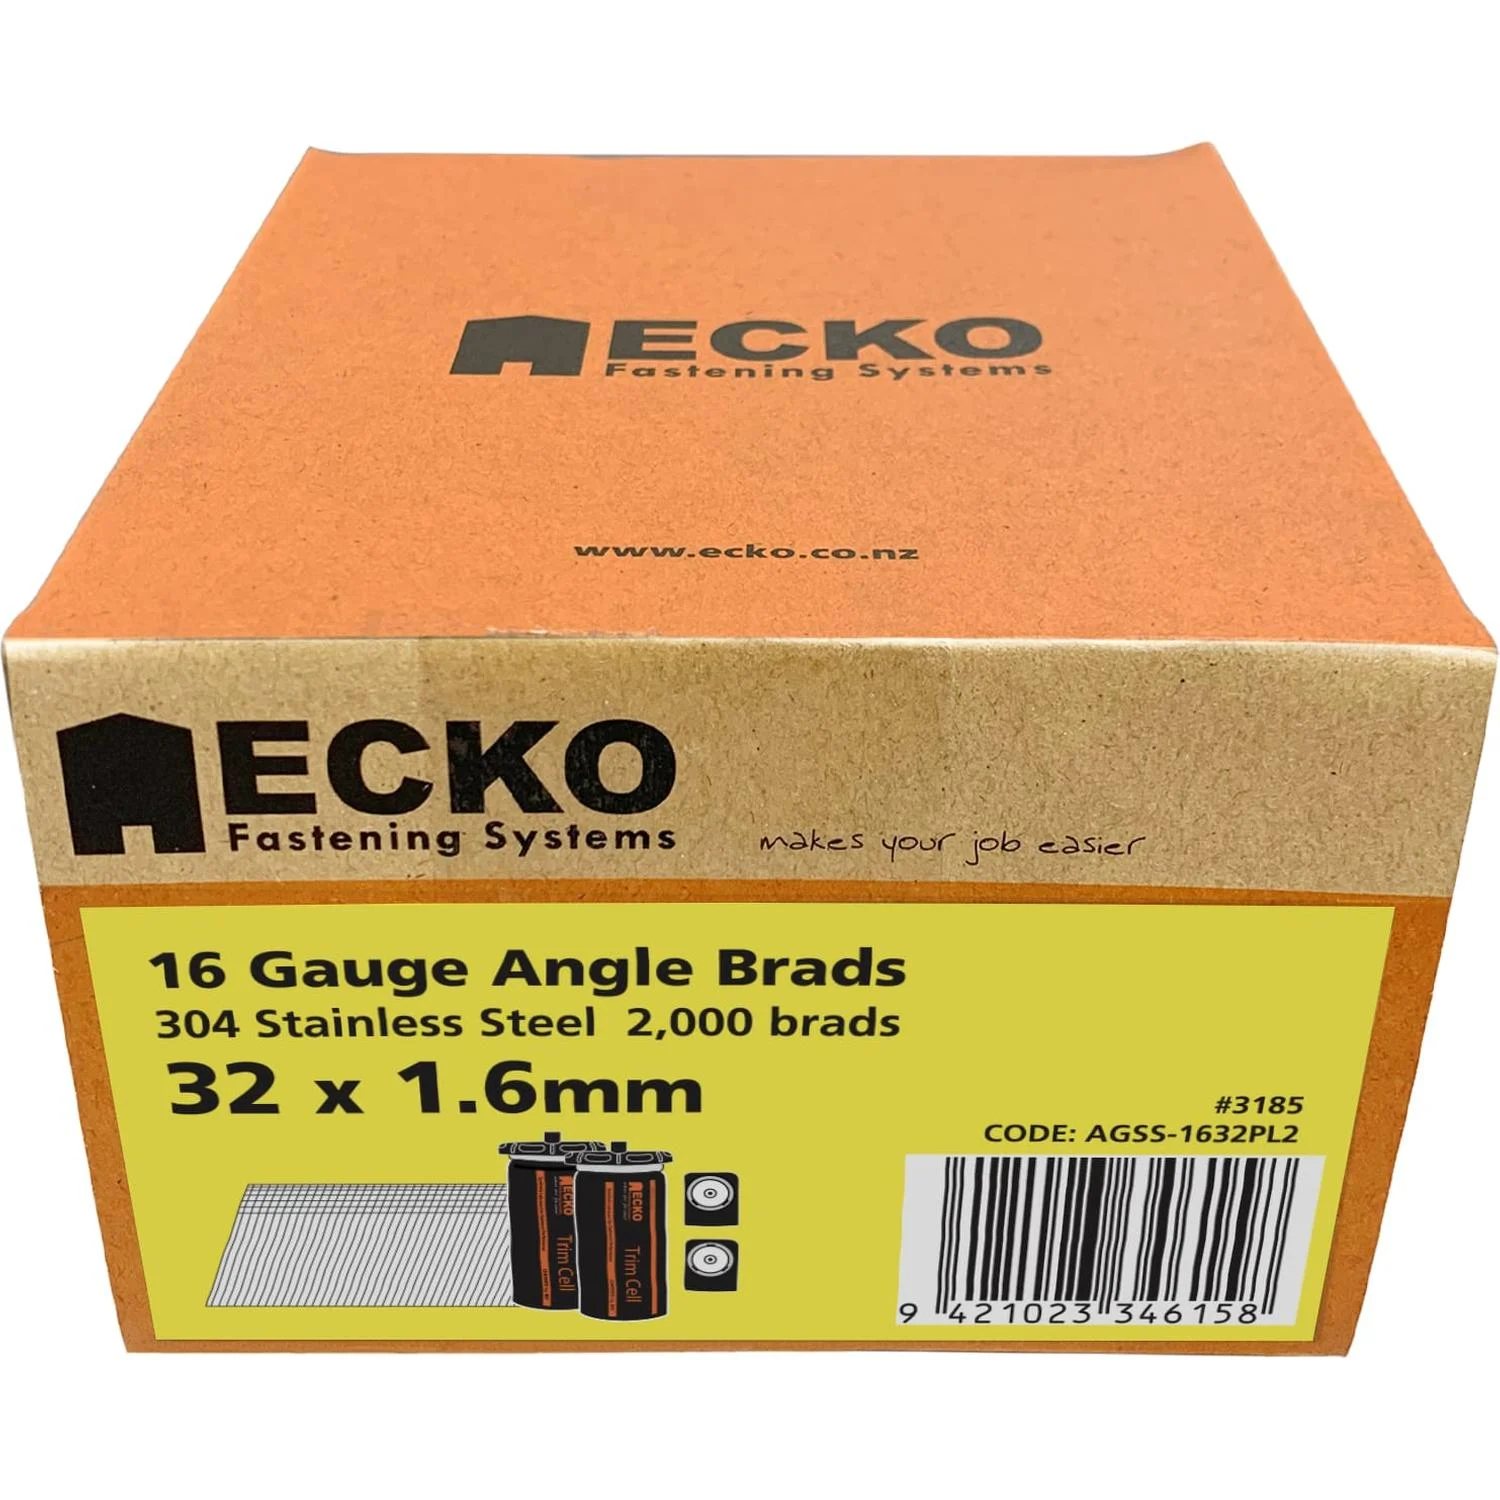 Ecko 16 Gauge Angle Brads Gas Pack 32 X 1.6Mm 304 Stainless Steel (2000)